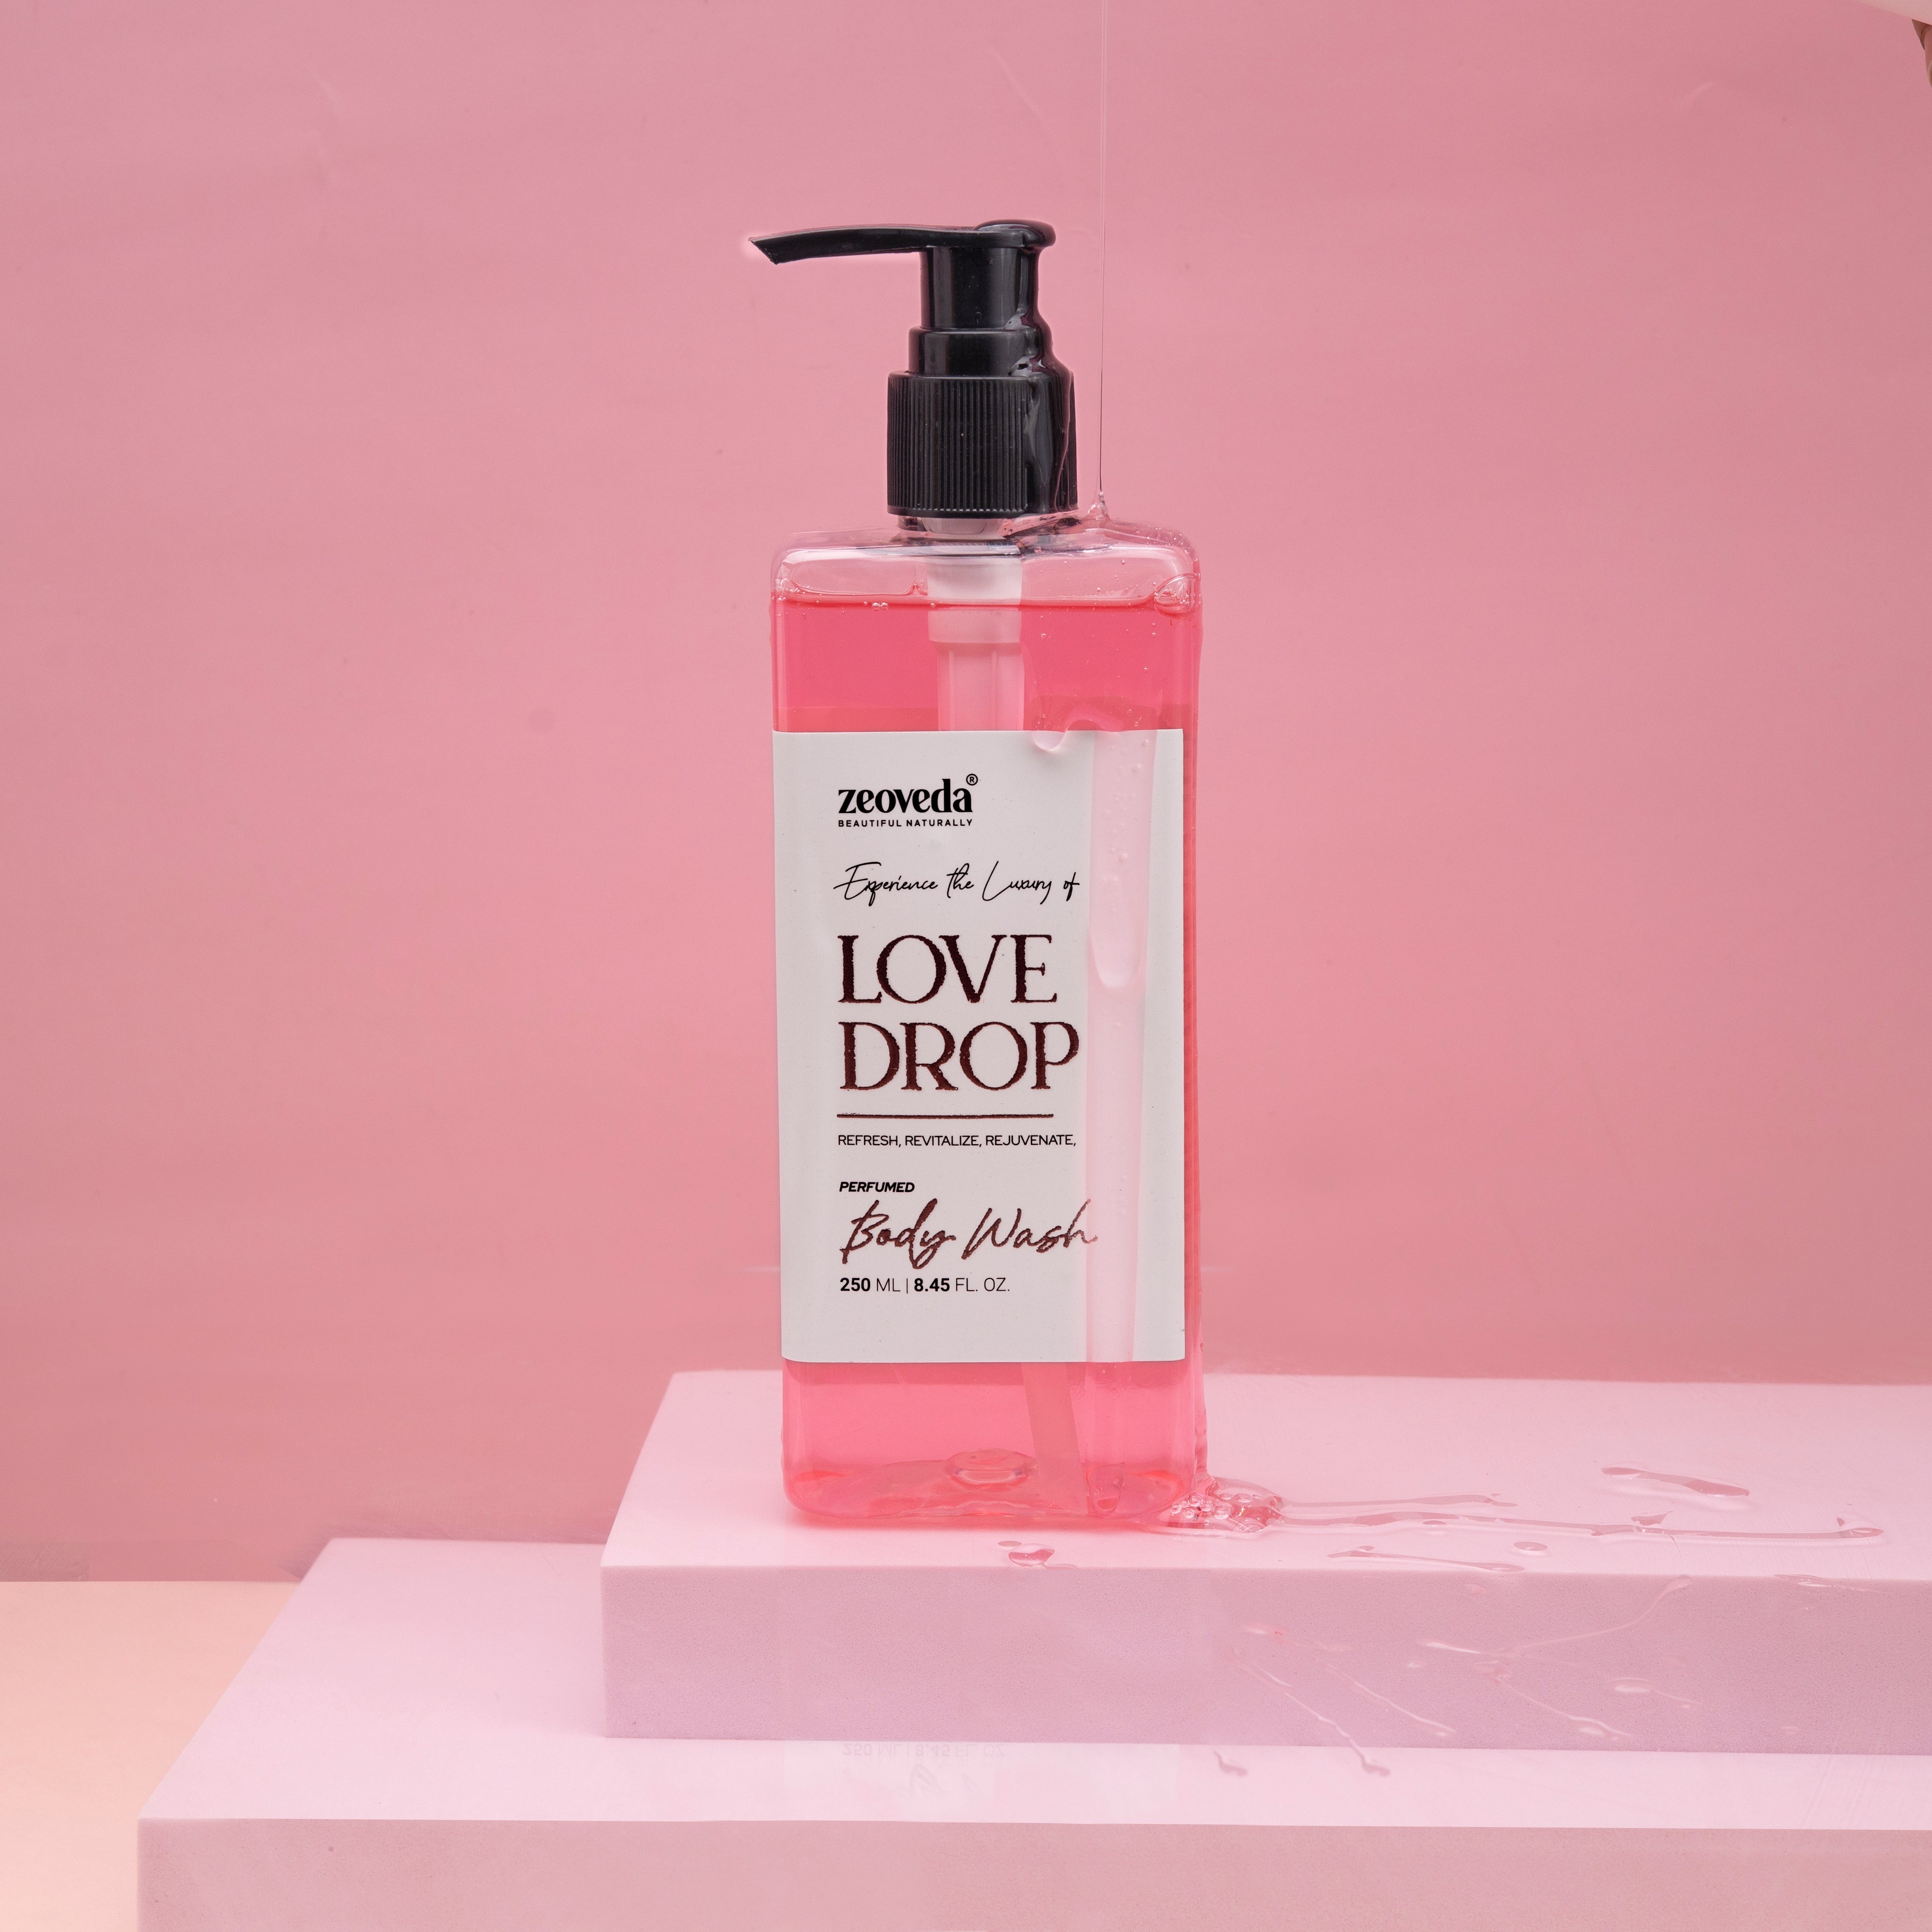 Love Drop Perfumed Luxury Body Wash With Strawberry Extract | Refreshing Shower Gel For Men & Women(250 ML)